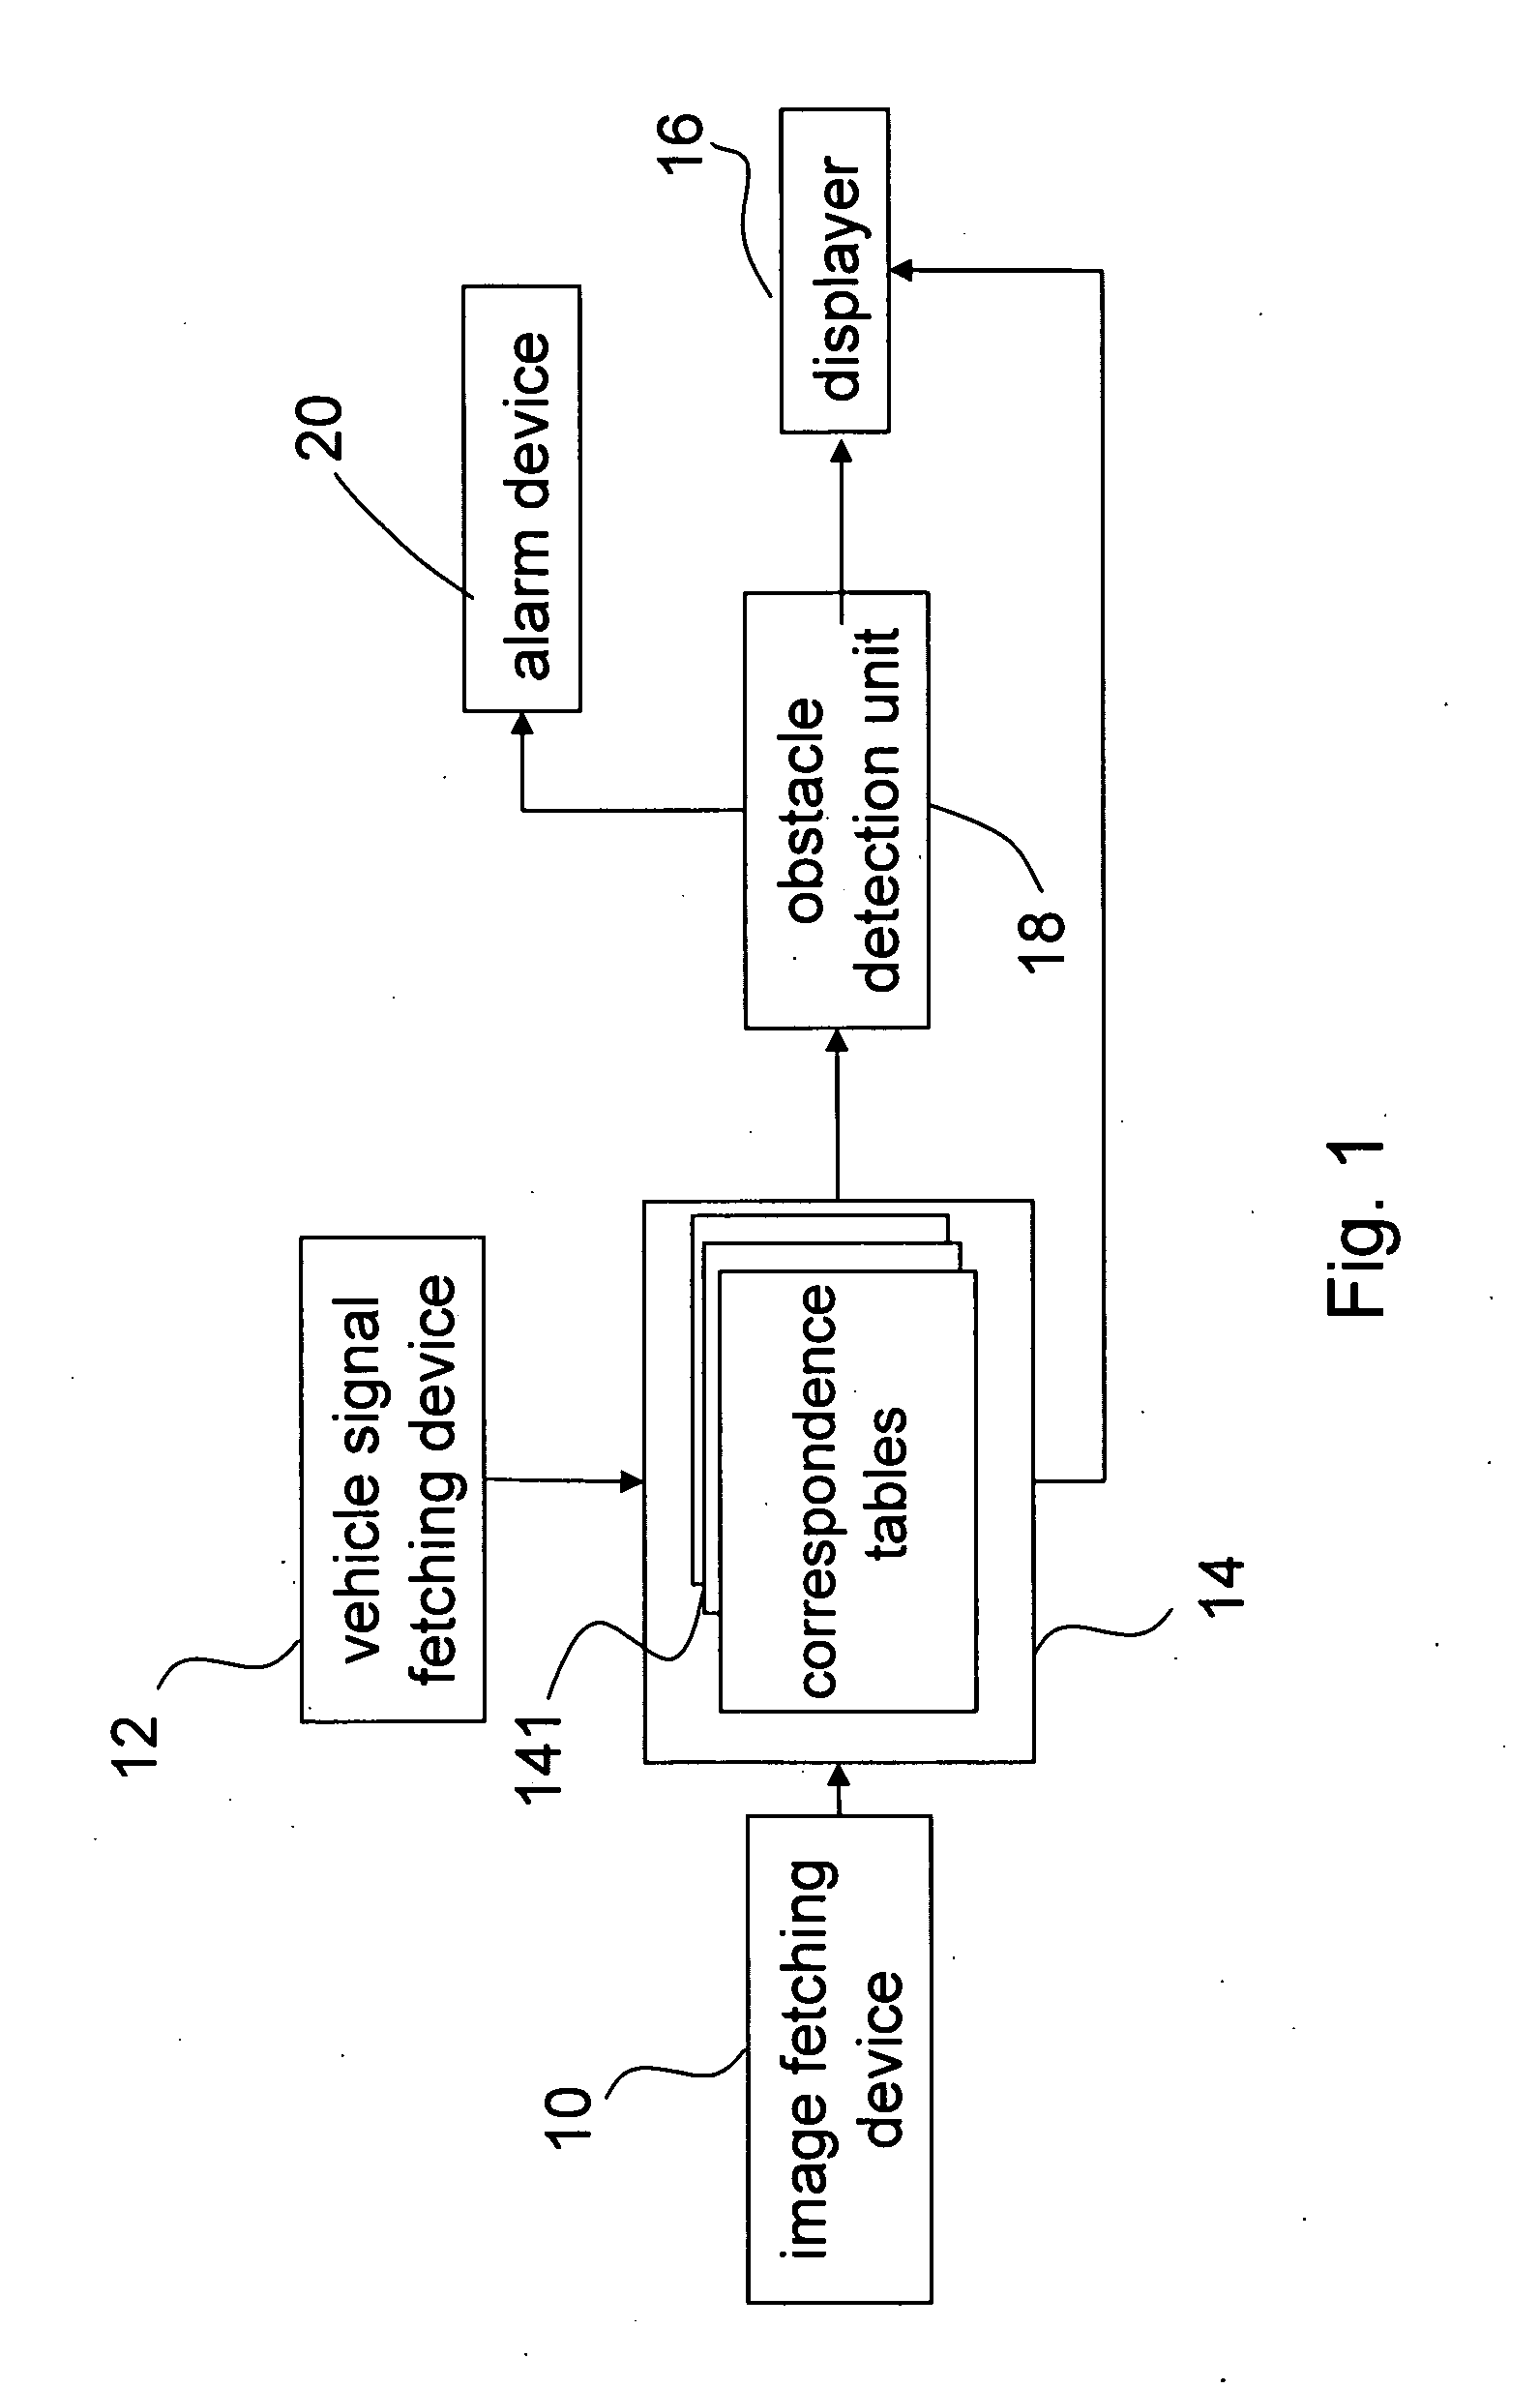 Obstacle determination system and method implemented through utilizing bird's-eye-view images